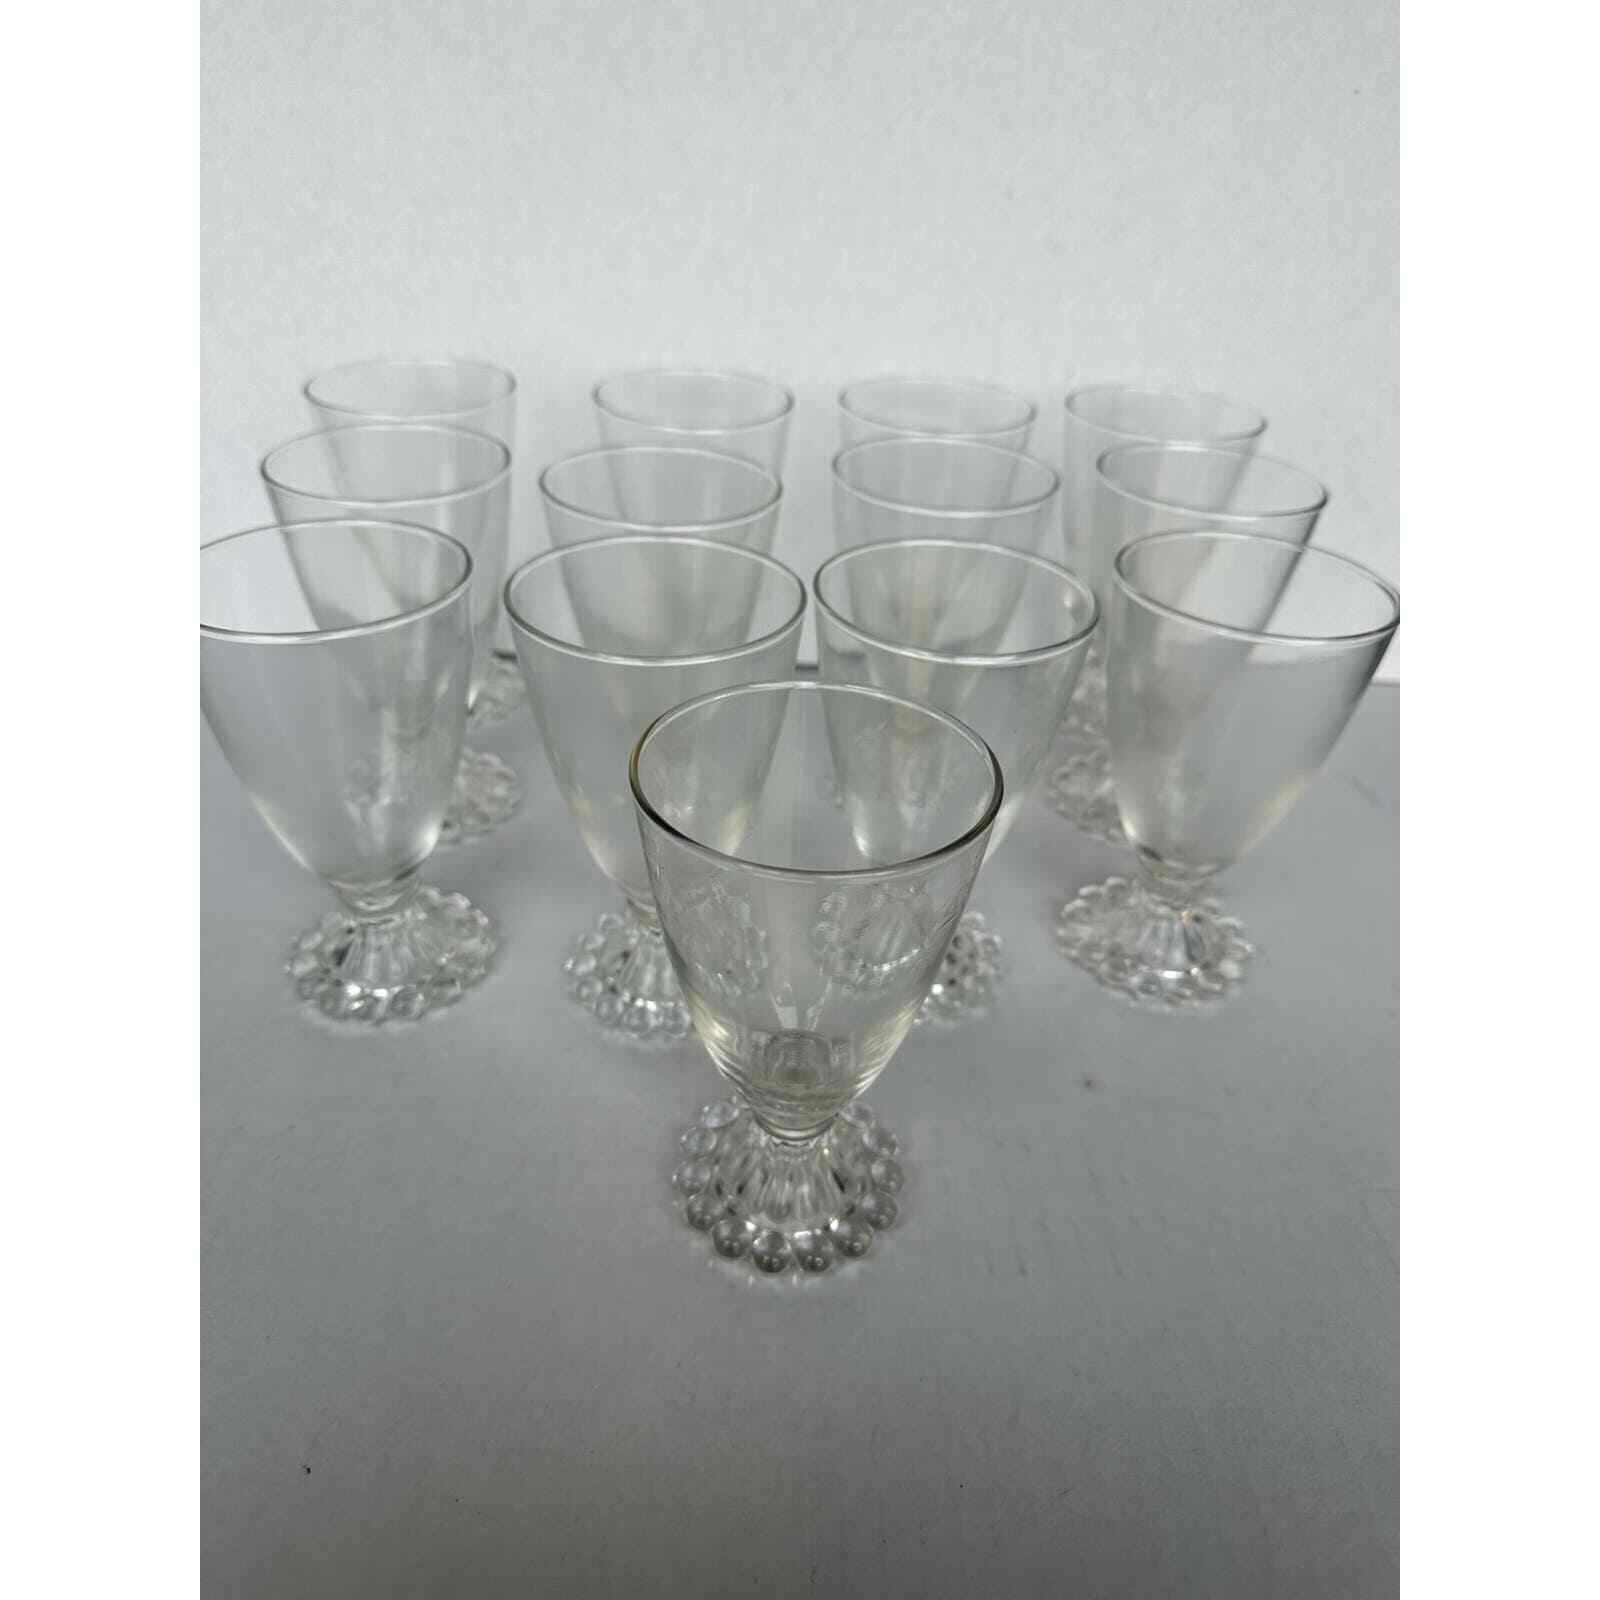 Vintage Imperial Candlewick Collection sold as a set 16oz glasses (9 pieces) 